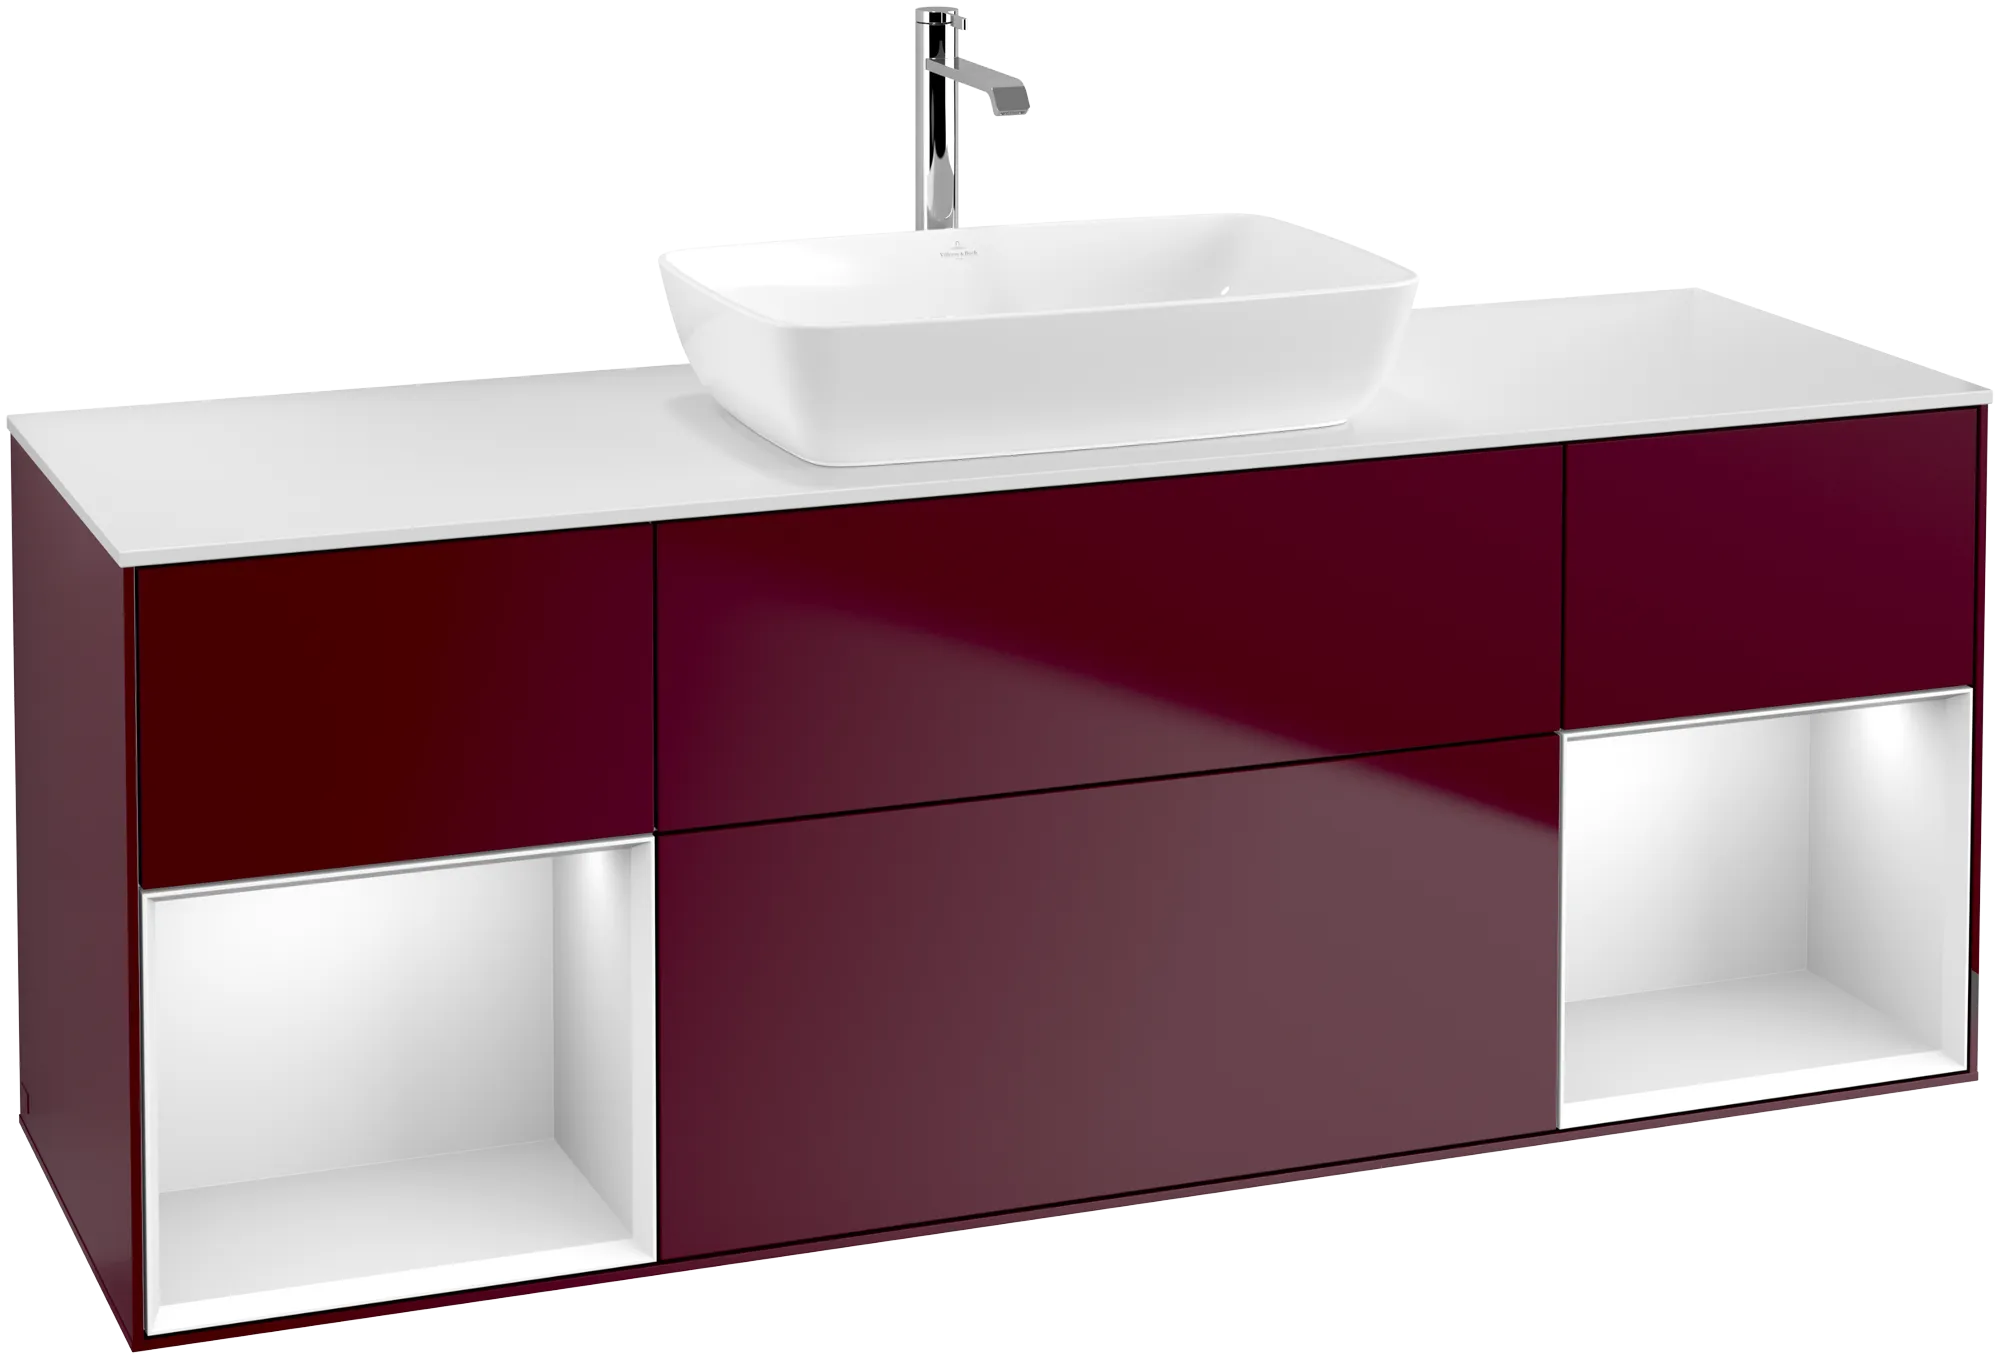 Obrázek VILLEROY BOCH Finion Vanity unit, with lighting, 4 pull-out compartments, 1600 x 603 x 501 mm, Peony Matt Lacquer / White Matt Lacquer / Glass White Matt #G861MTHB